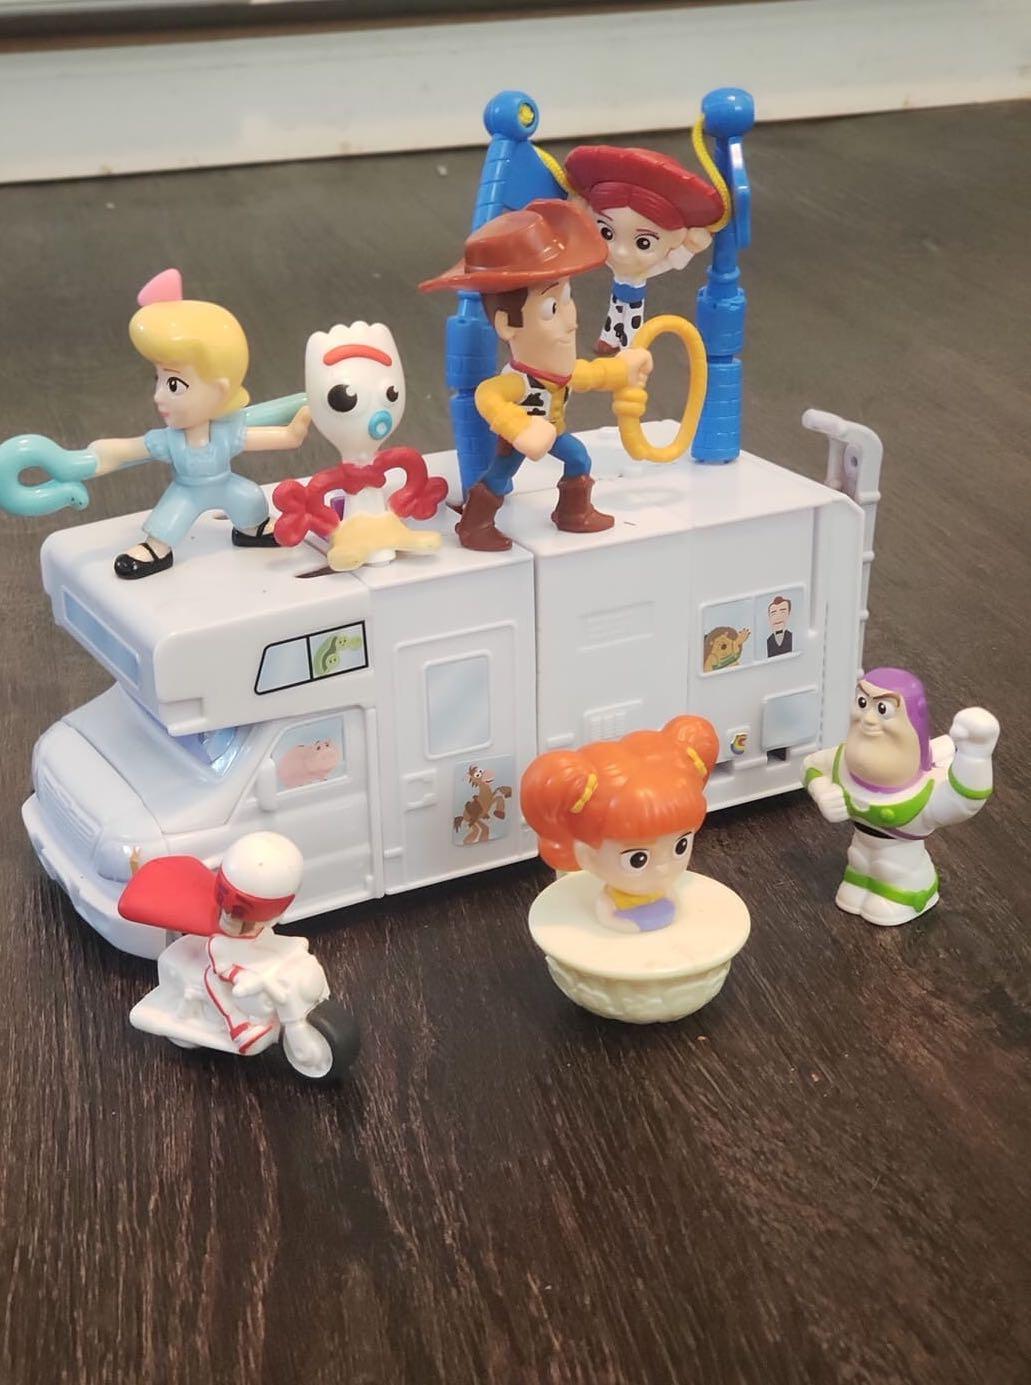 2019 McDONALD'S TOY STORY 4 HAPPY MEAL TOYS COMPLETE 10 PIECE SET! 